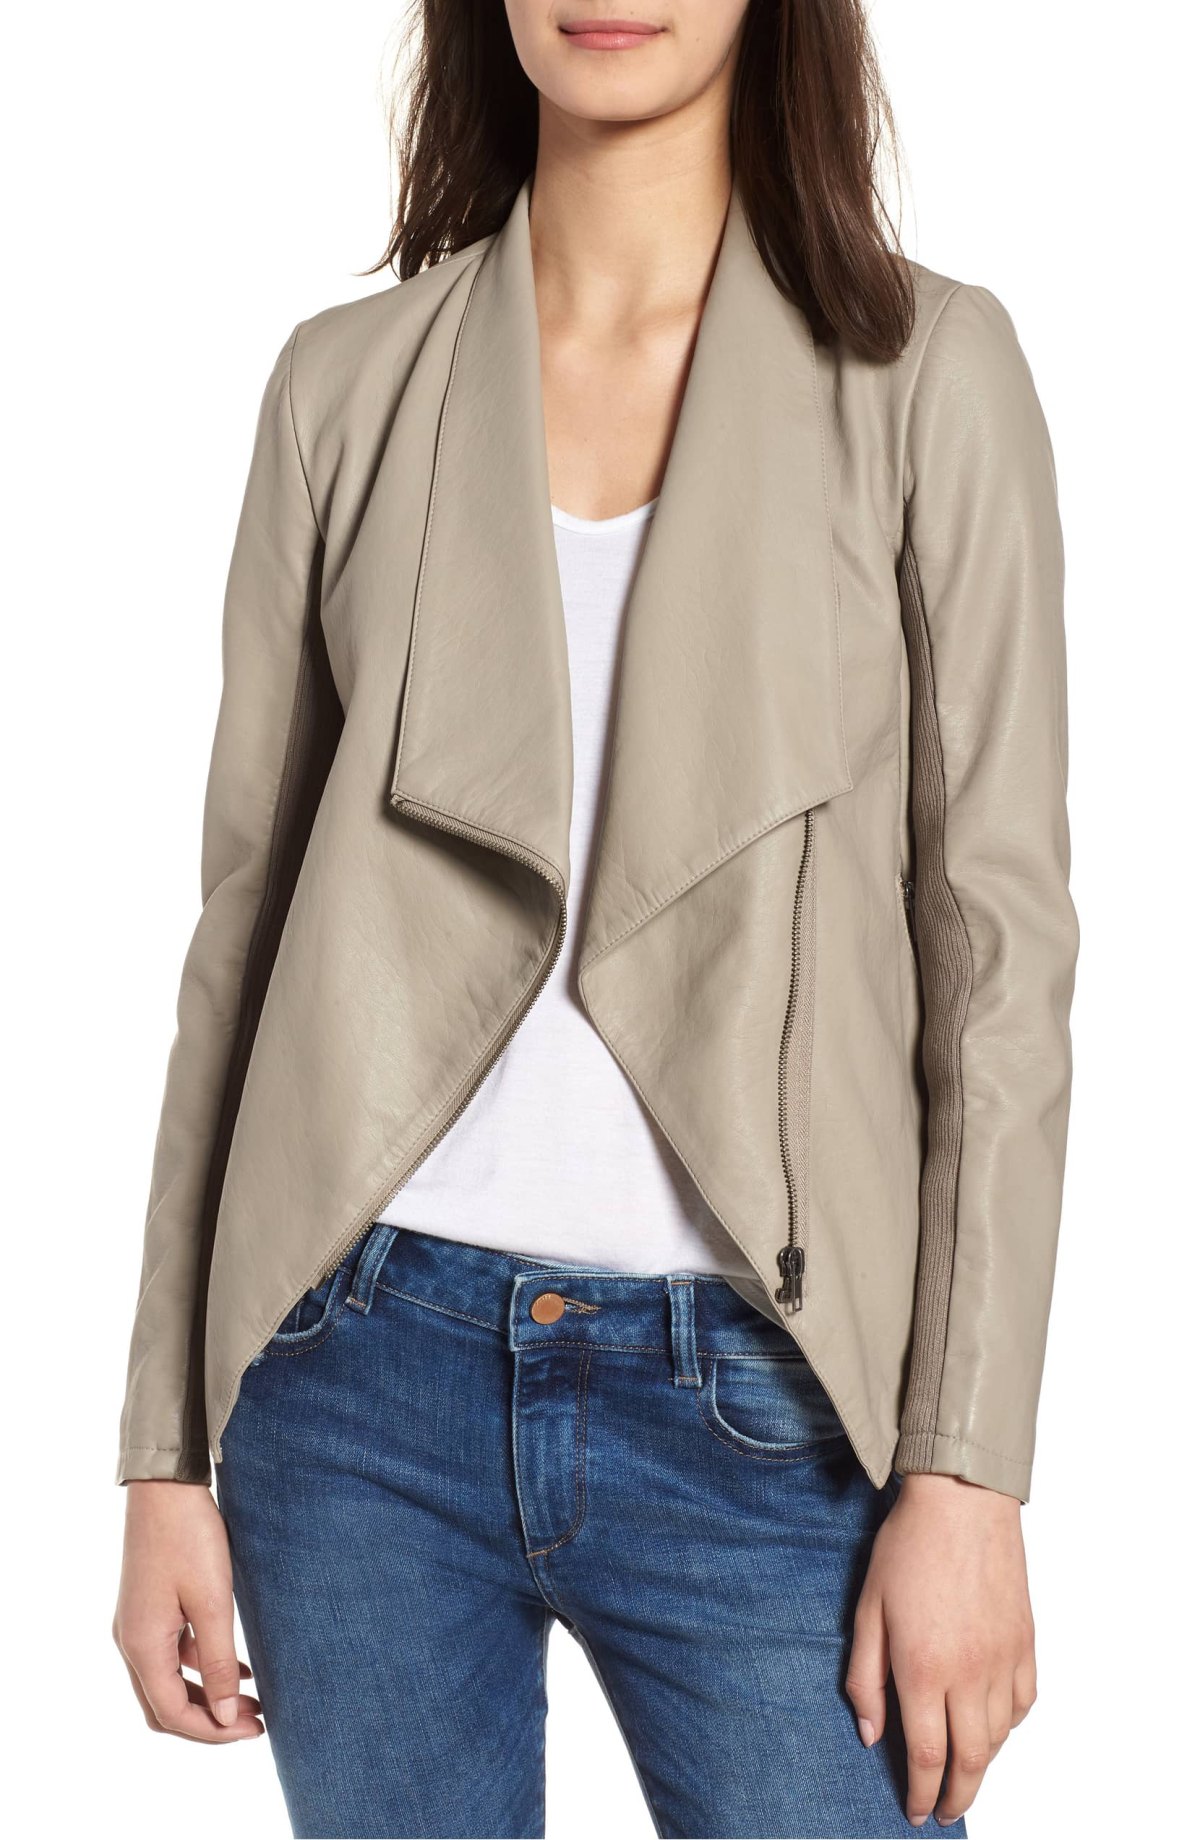 Stylishly Complete Your Fall Looks With This Faux Leather Jacket | Us ...